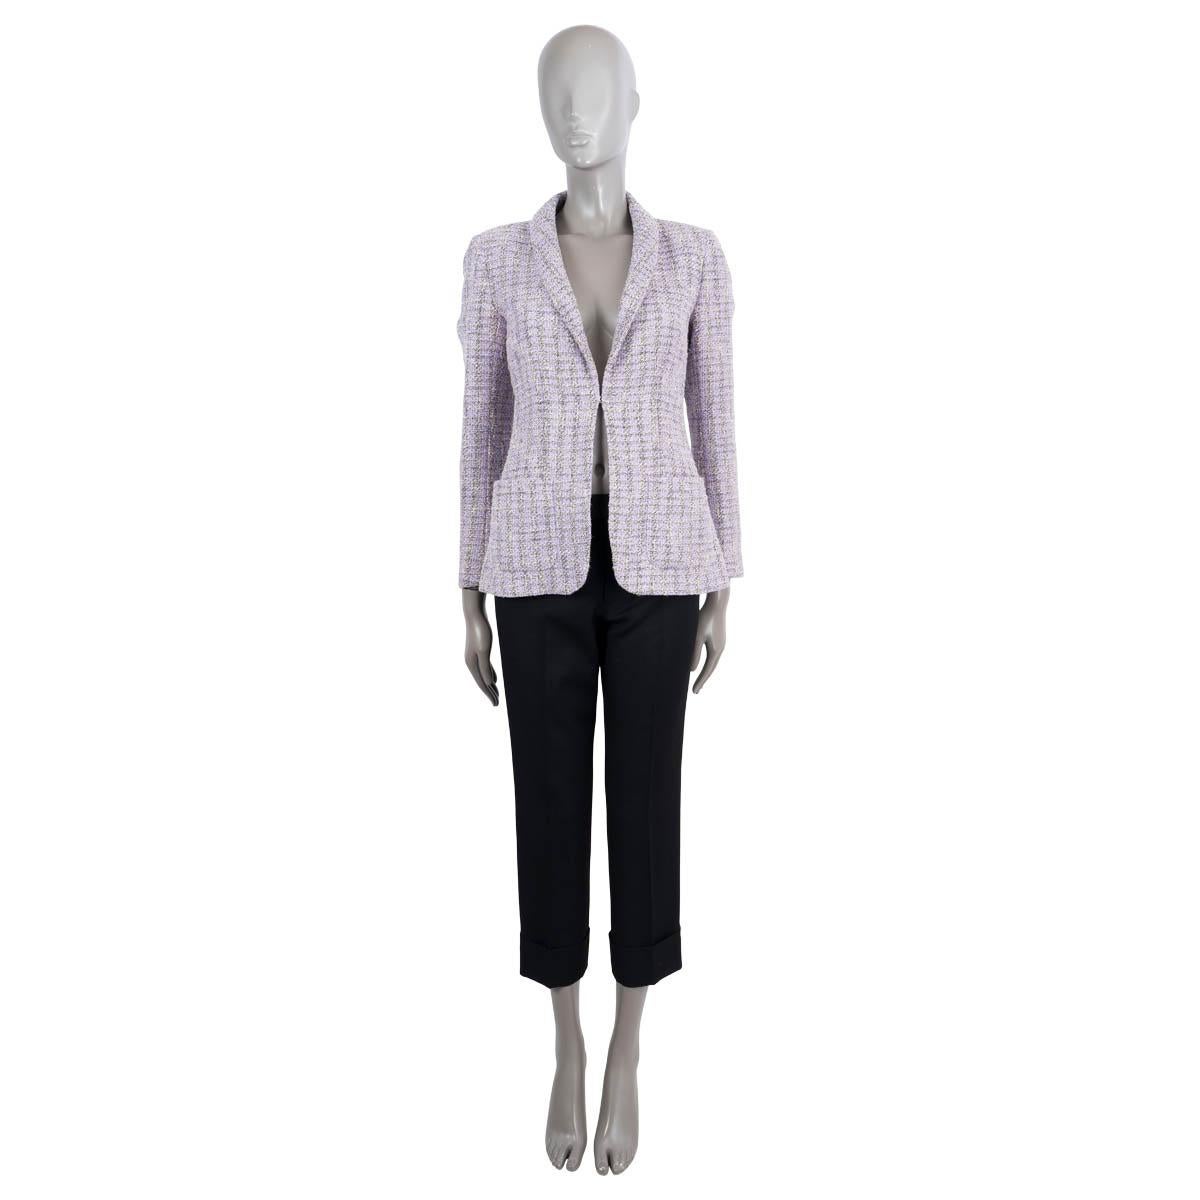 100% authentic Chanel iridescent tweed blazer in lilac, ivory and black cotton (42%), polyester (39%), nylon (10%) and viscose (9%). Features a shawl collar and two patch pockets on the front. Closes with a single concealed button. Lined in silk